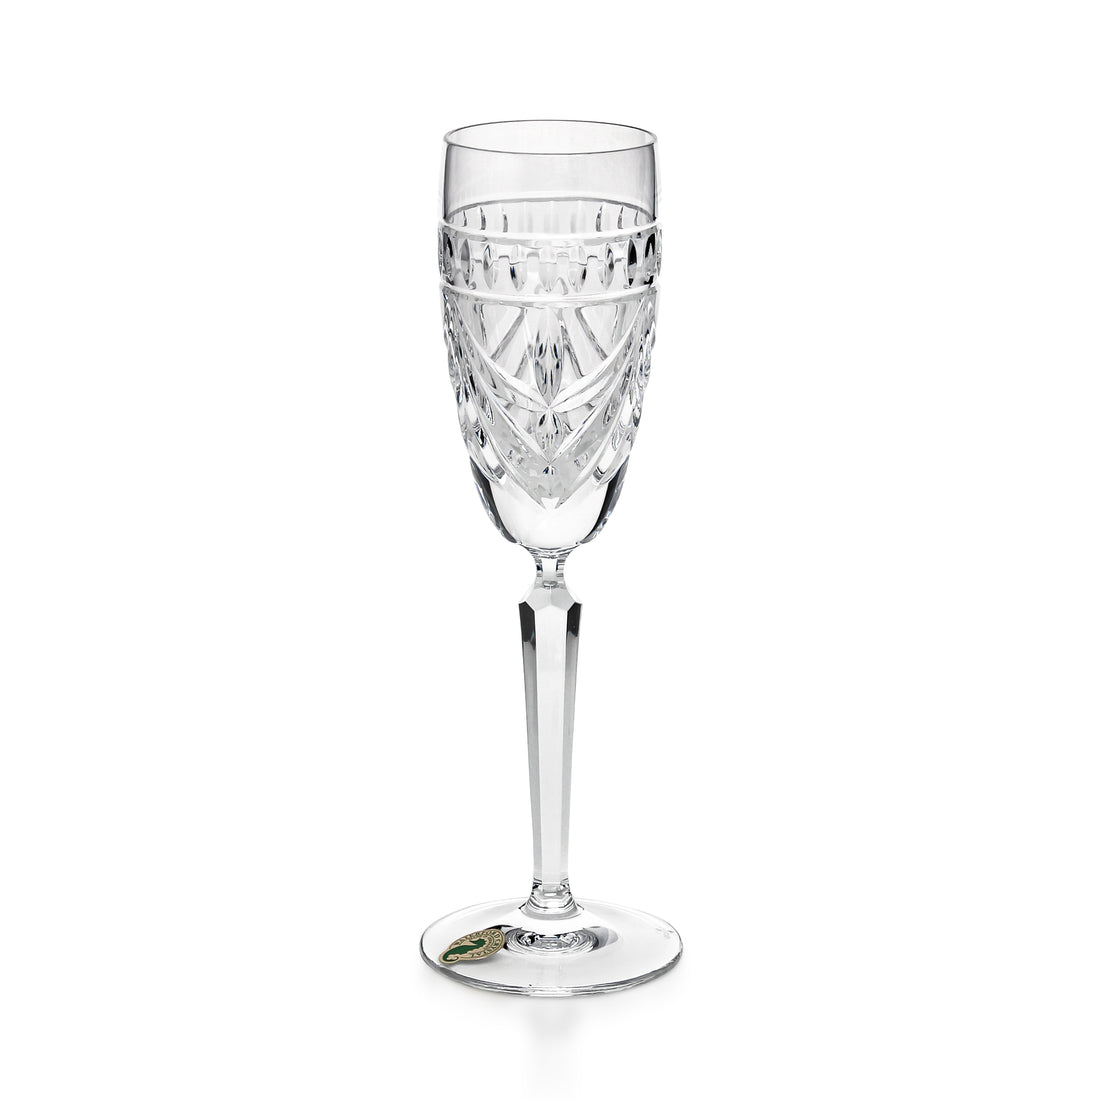 WATERFORD Overture Champagne Flutes - Set of 4